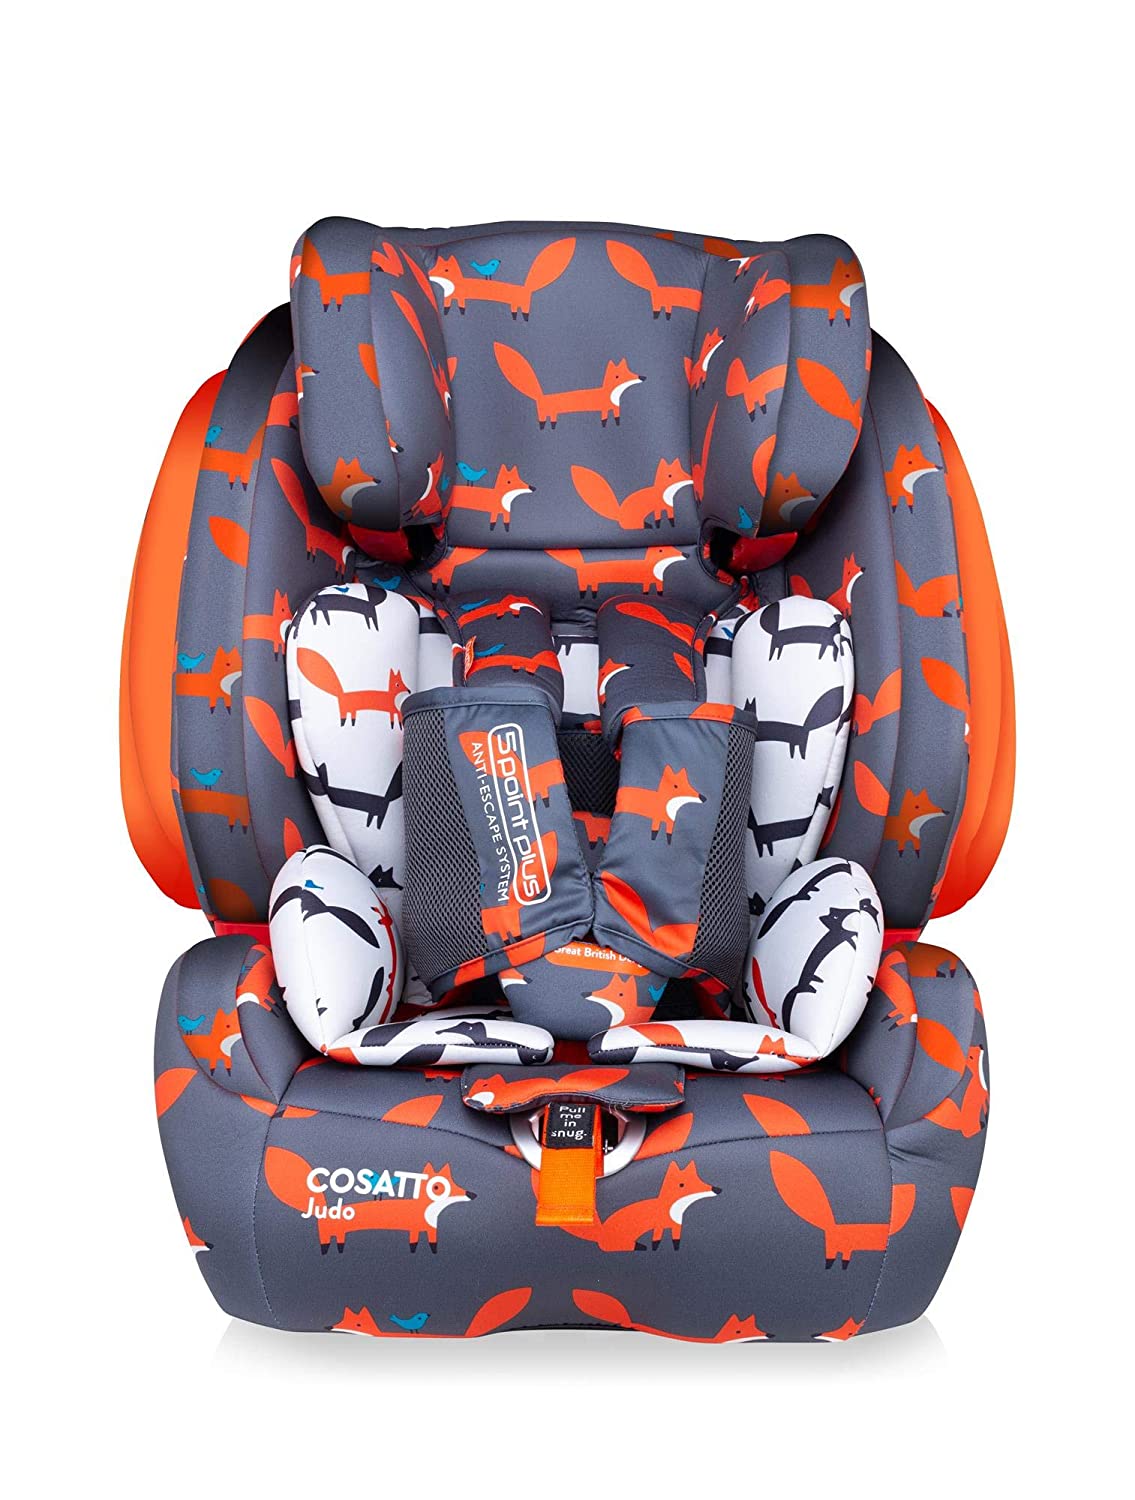 Cosatto Judo Child Car Seat Group 1/2/3, 9-36 kg, 9 Months-12 Years, ISOFIX, Forward Facing, Removable Harness, Reclines (Bunny Buddy)